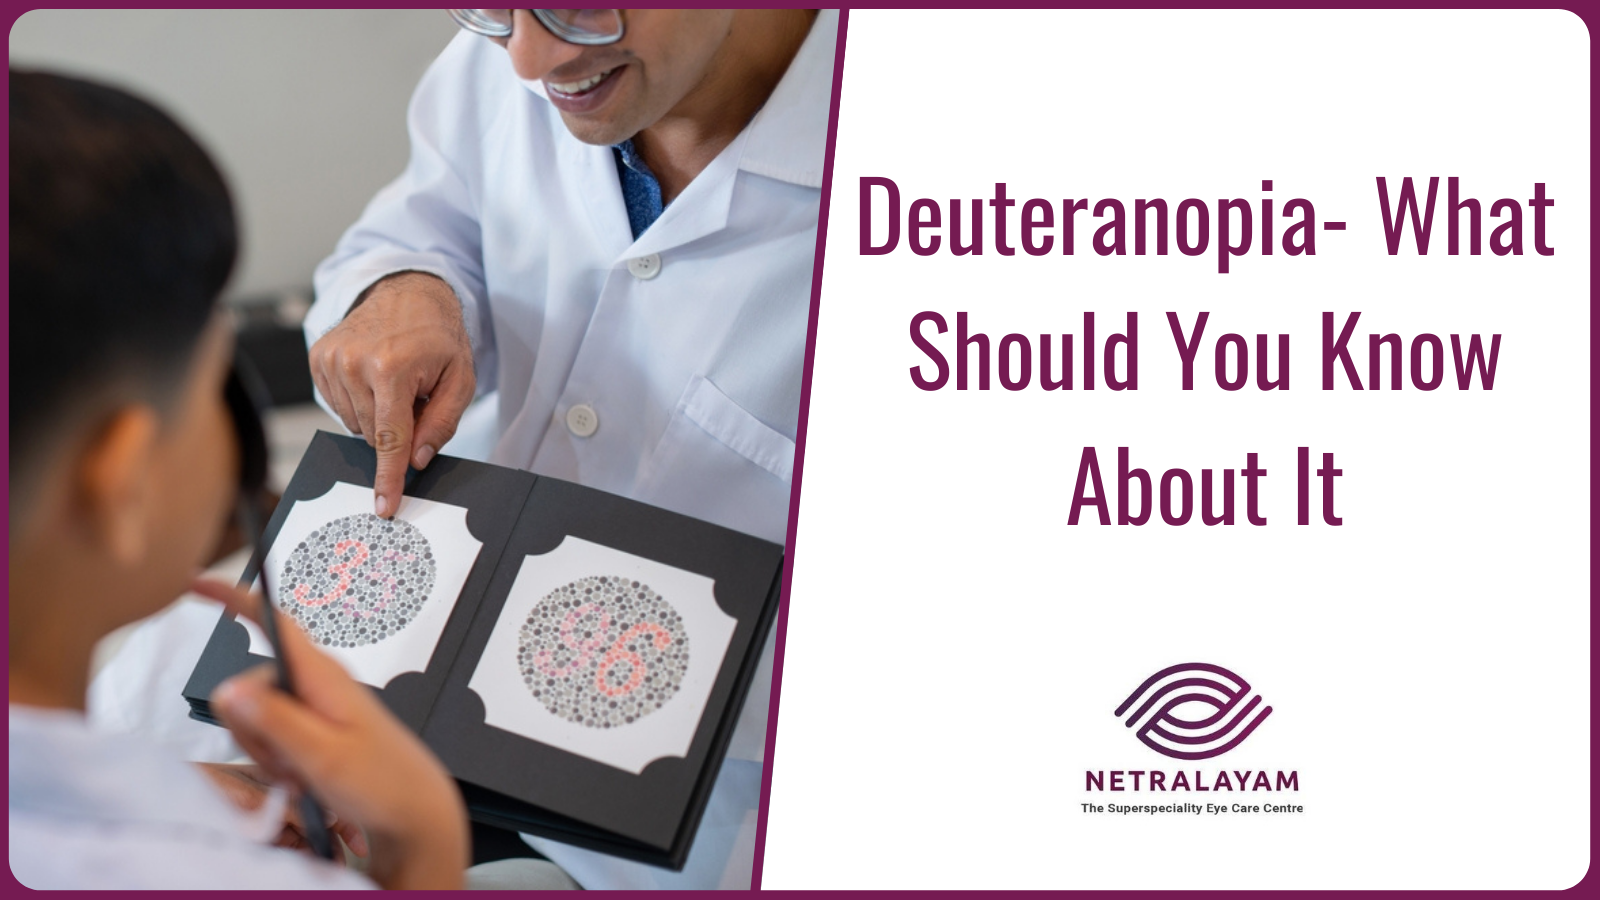 Deuteranopia- What Should You Know About It